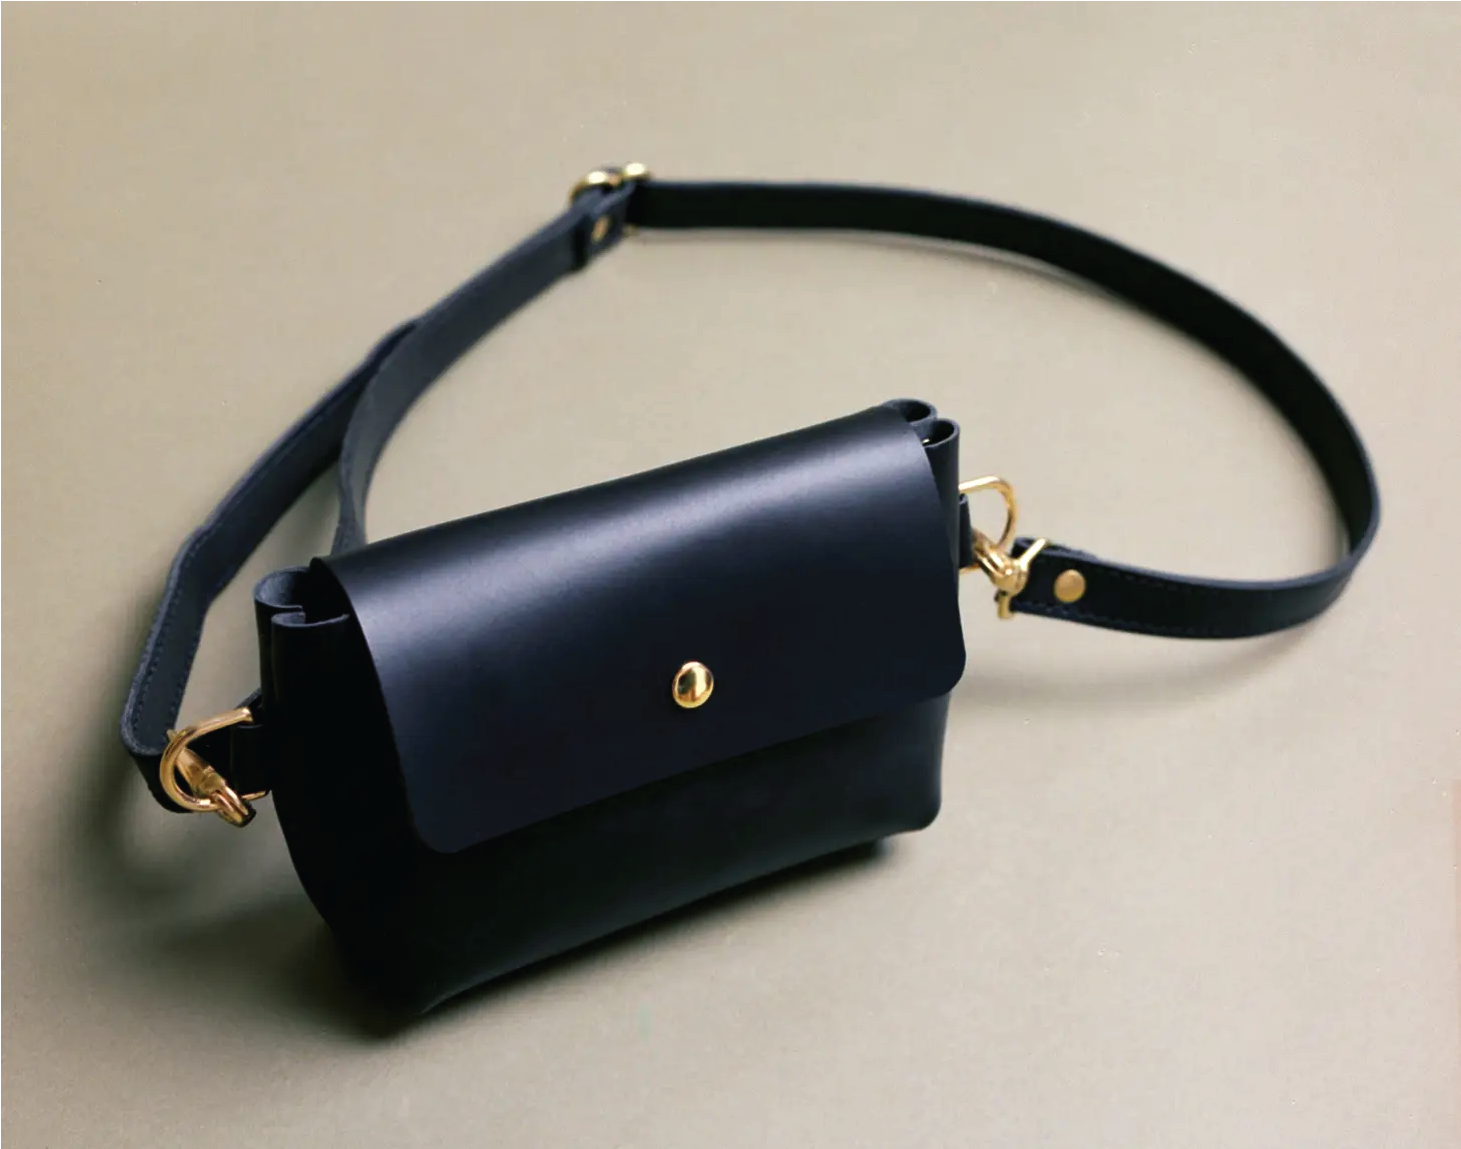 Black leather cross body bag, closed, on flat surface.